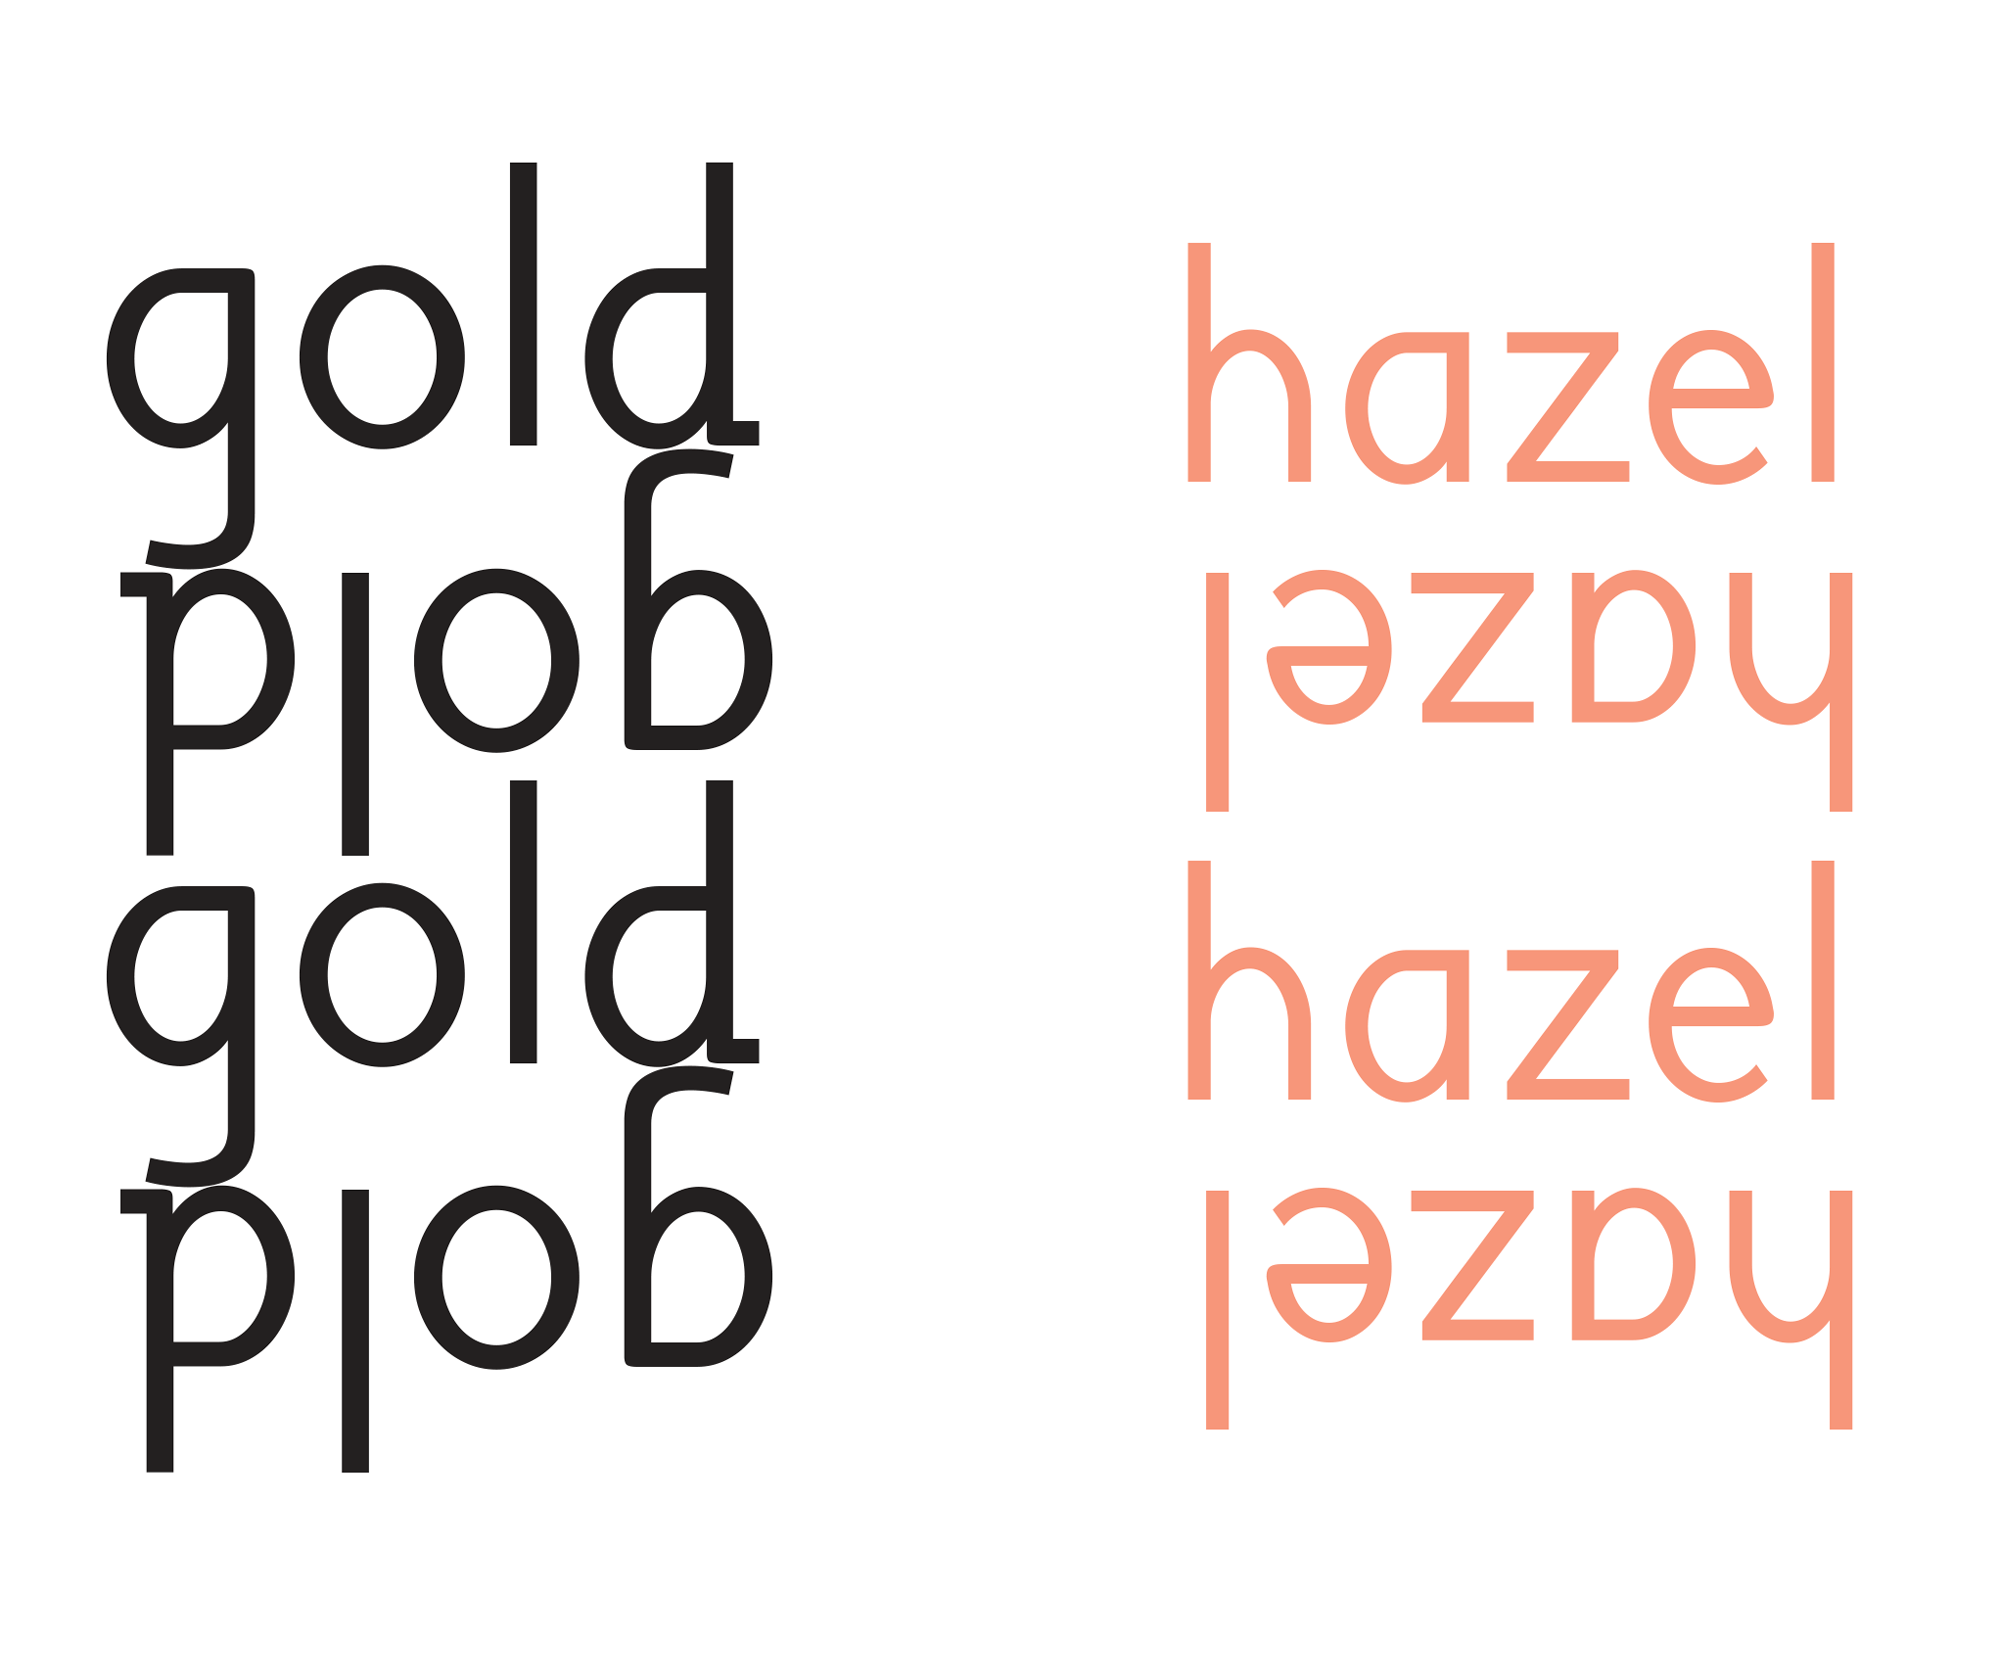 The word ‘gold’ in black on the left, then ‘hazel’ in pink on the right